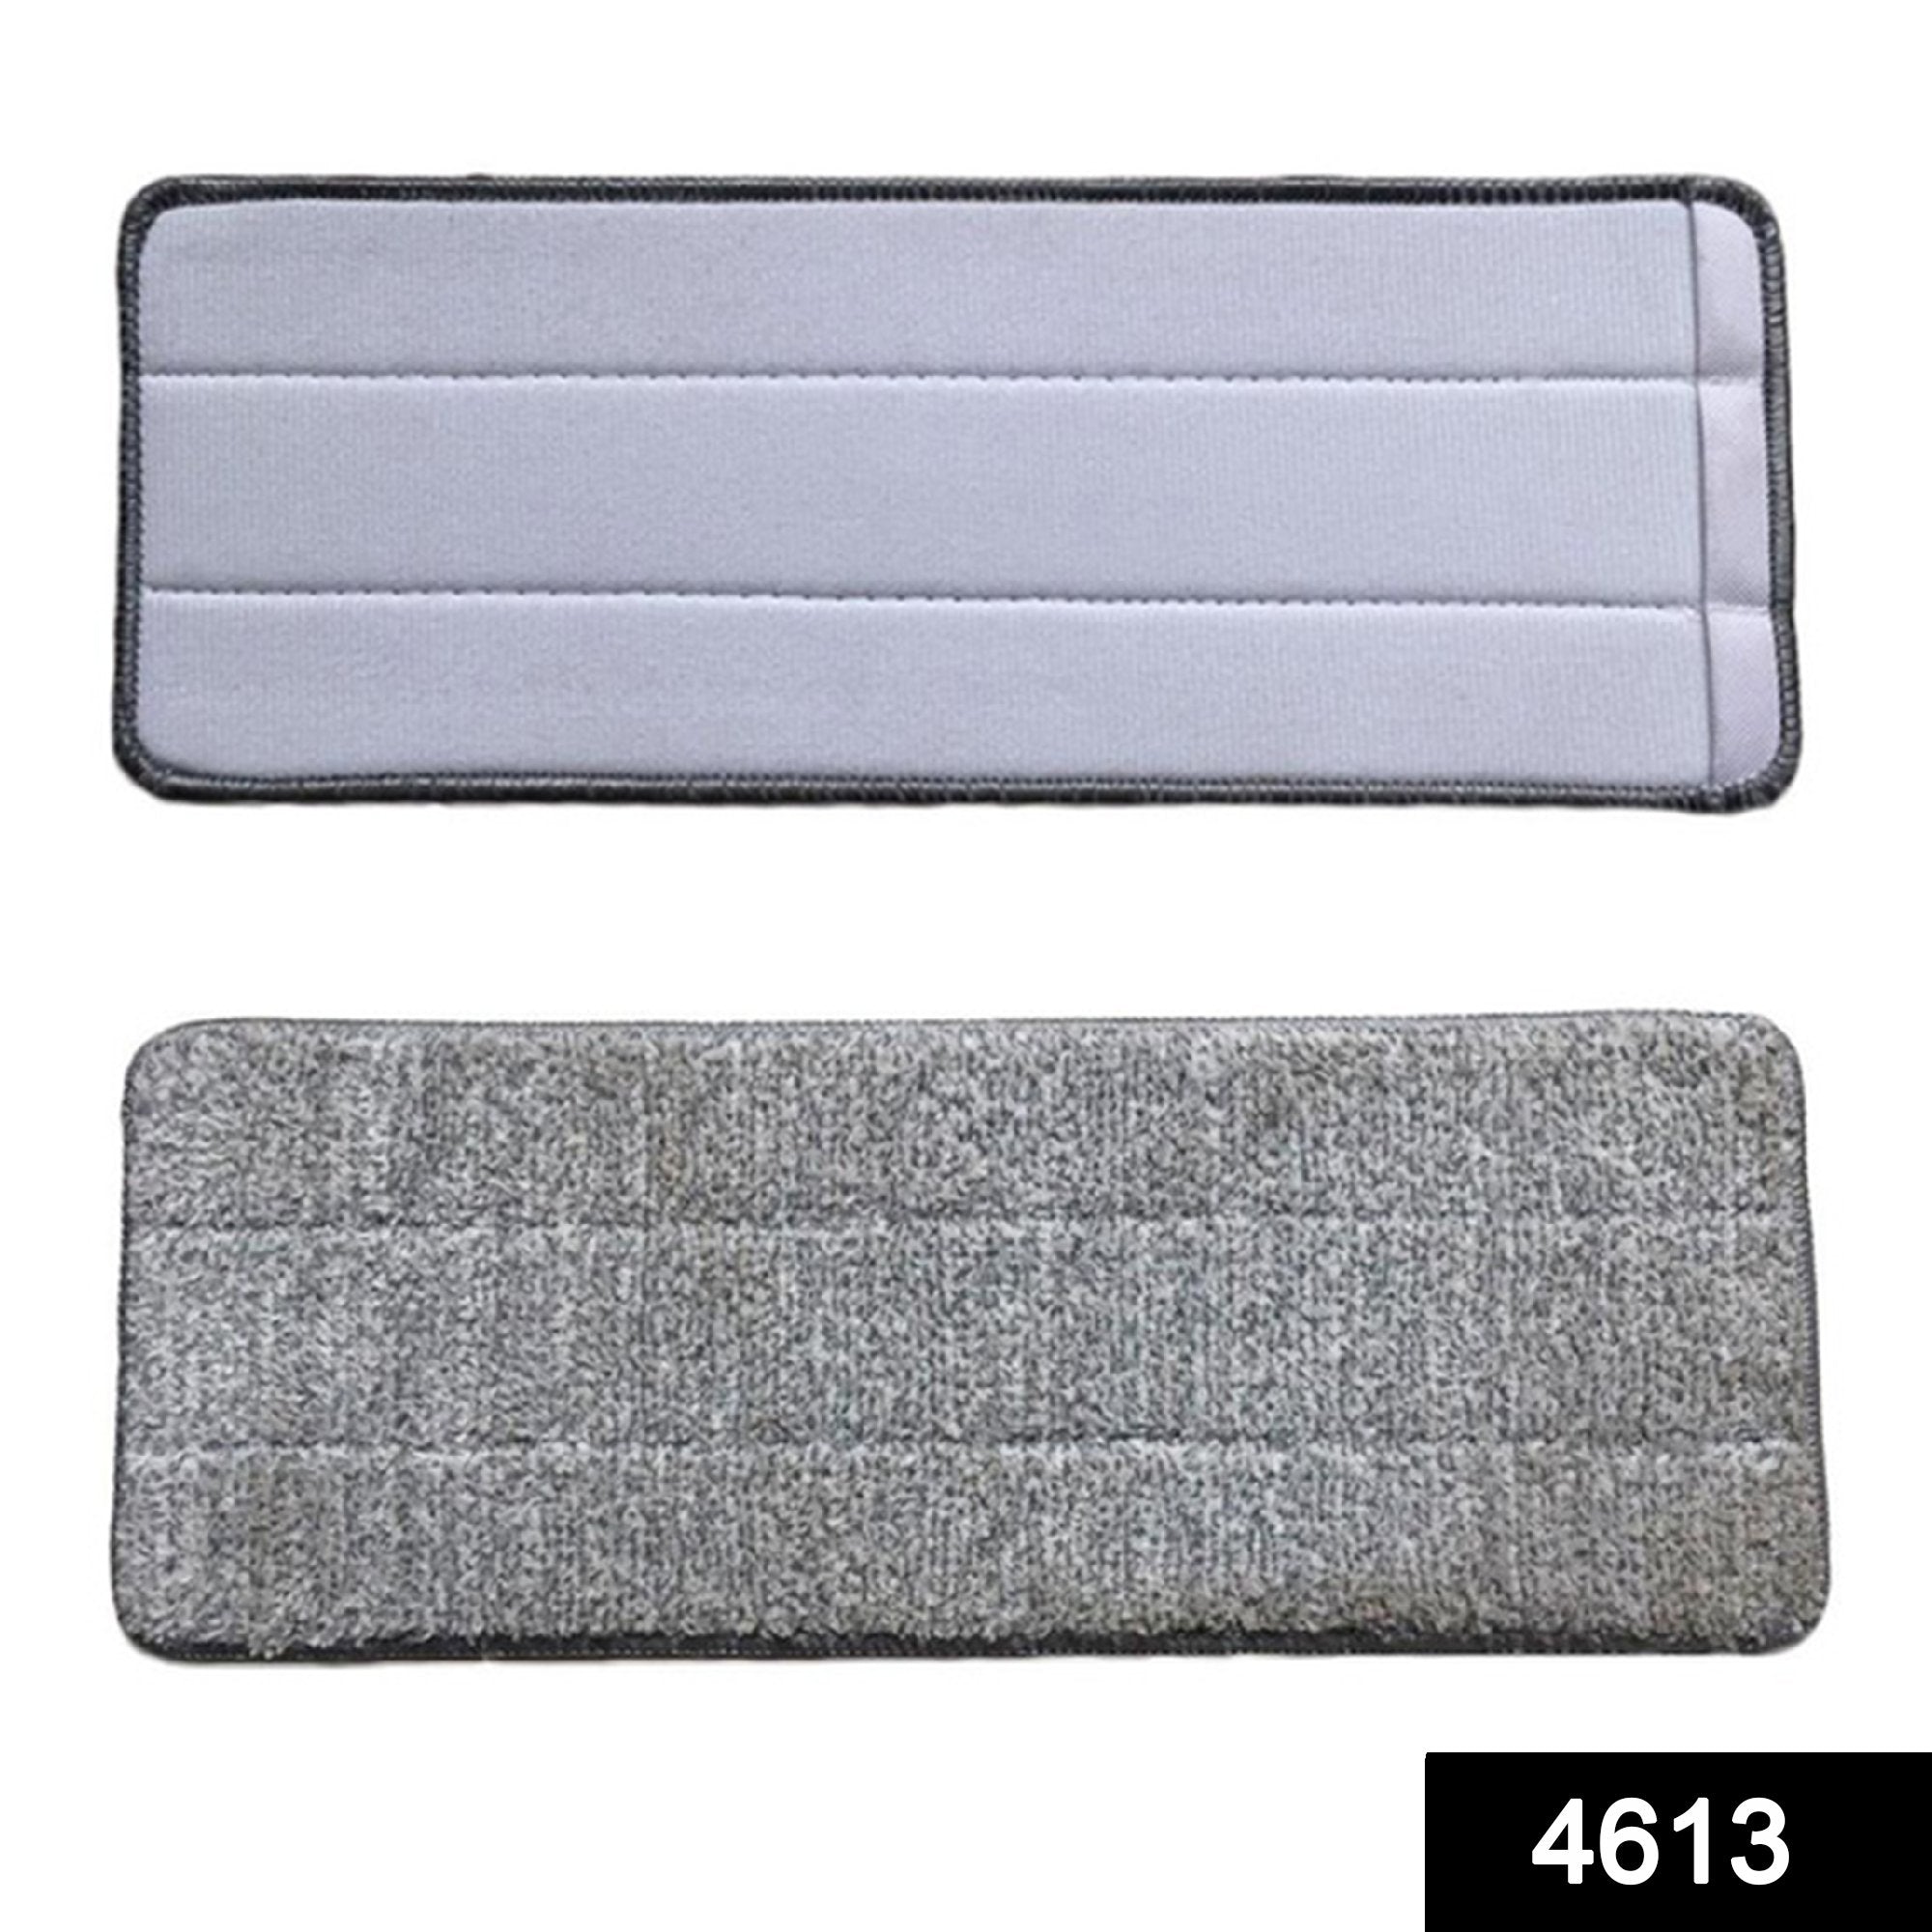 4613 Microfiber Cleaning Pads Replacement Heads - SkyShopy